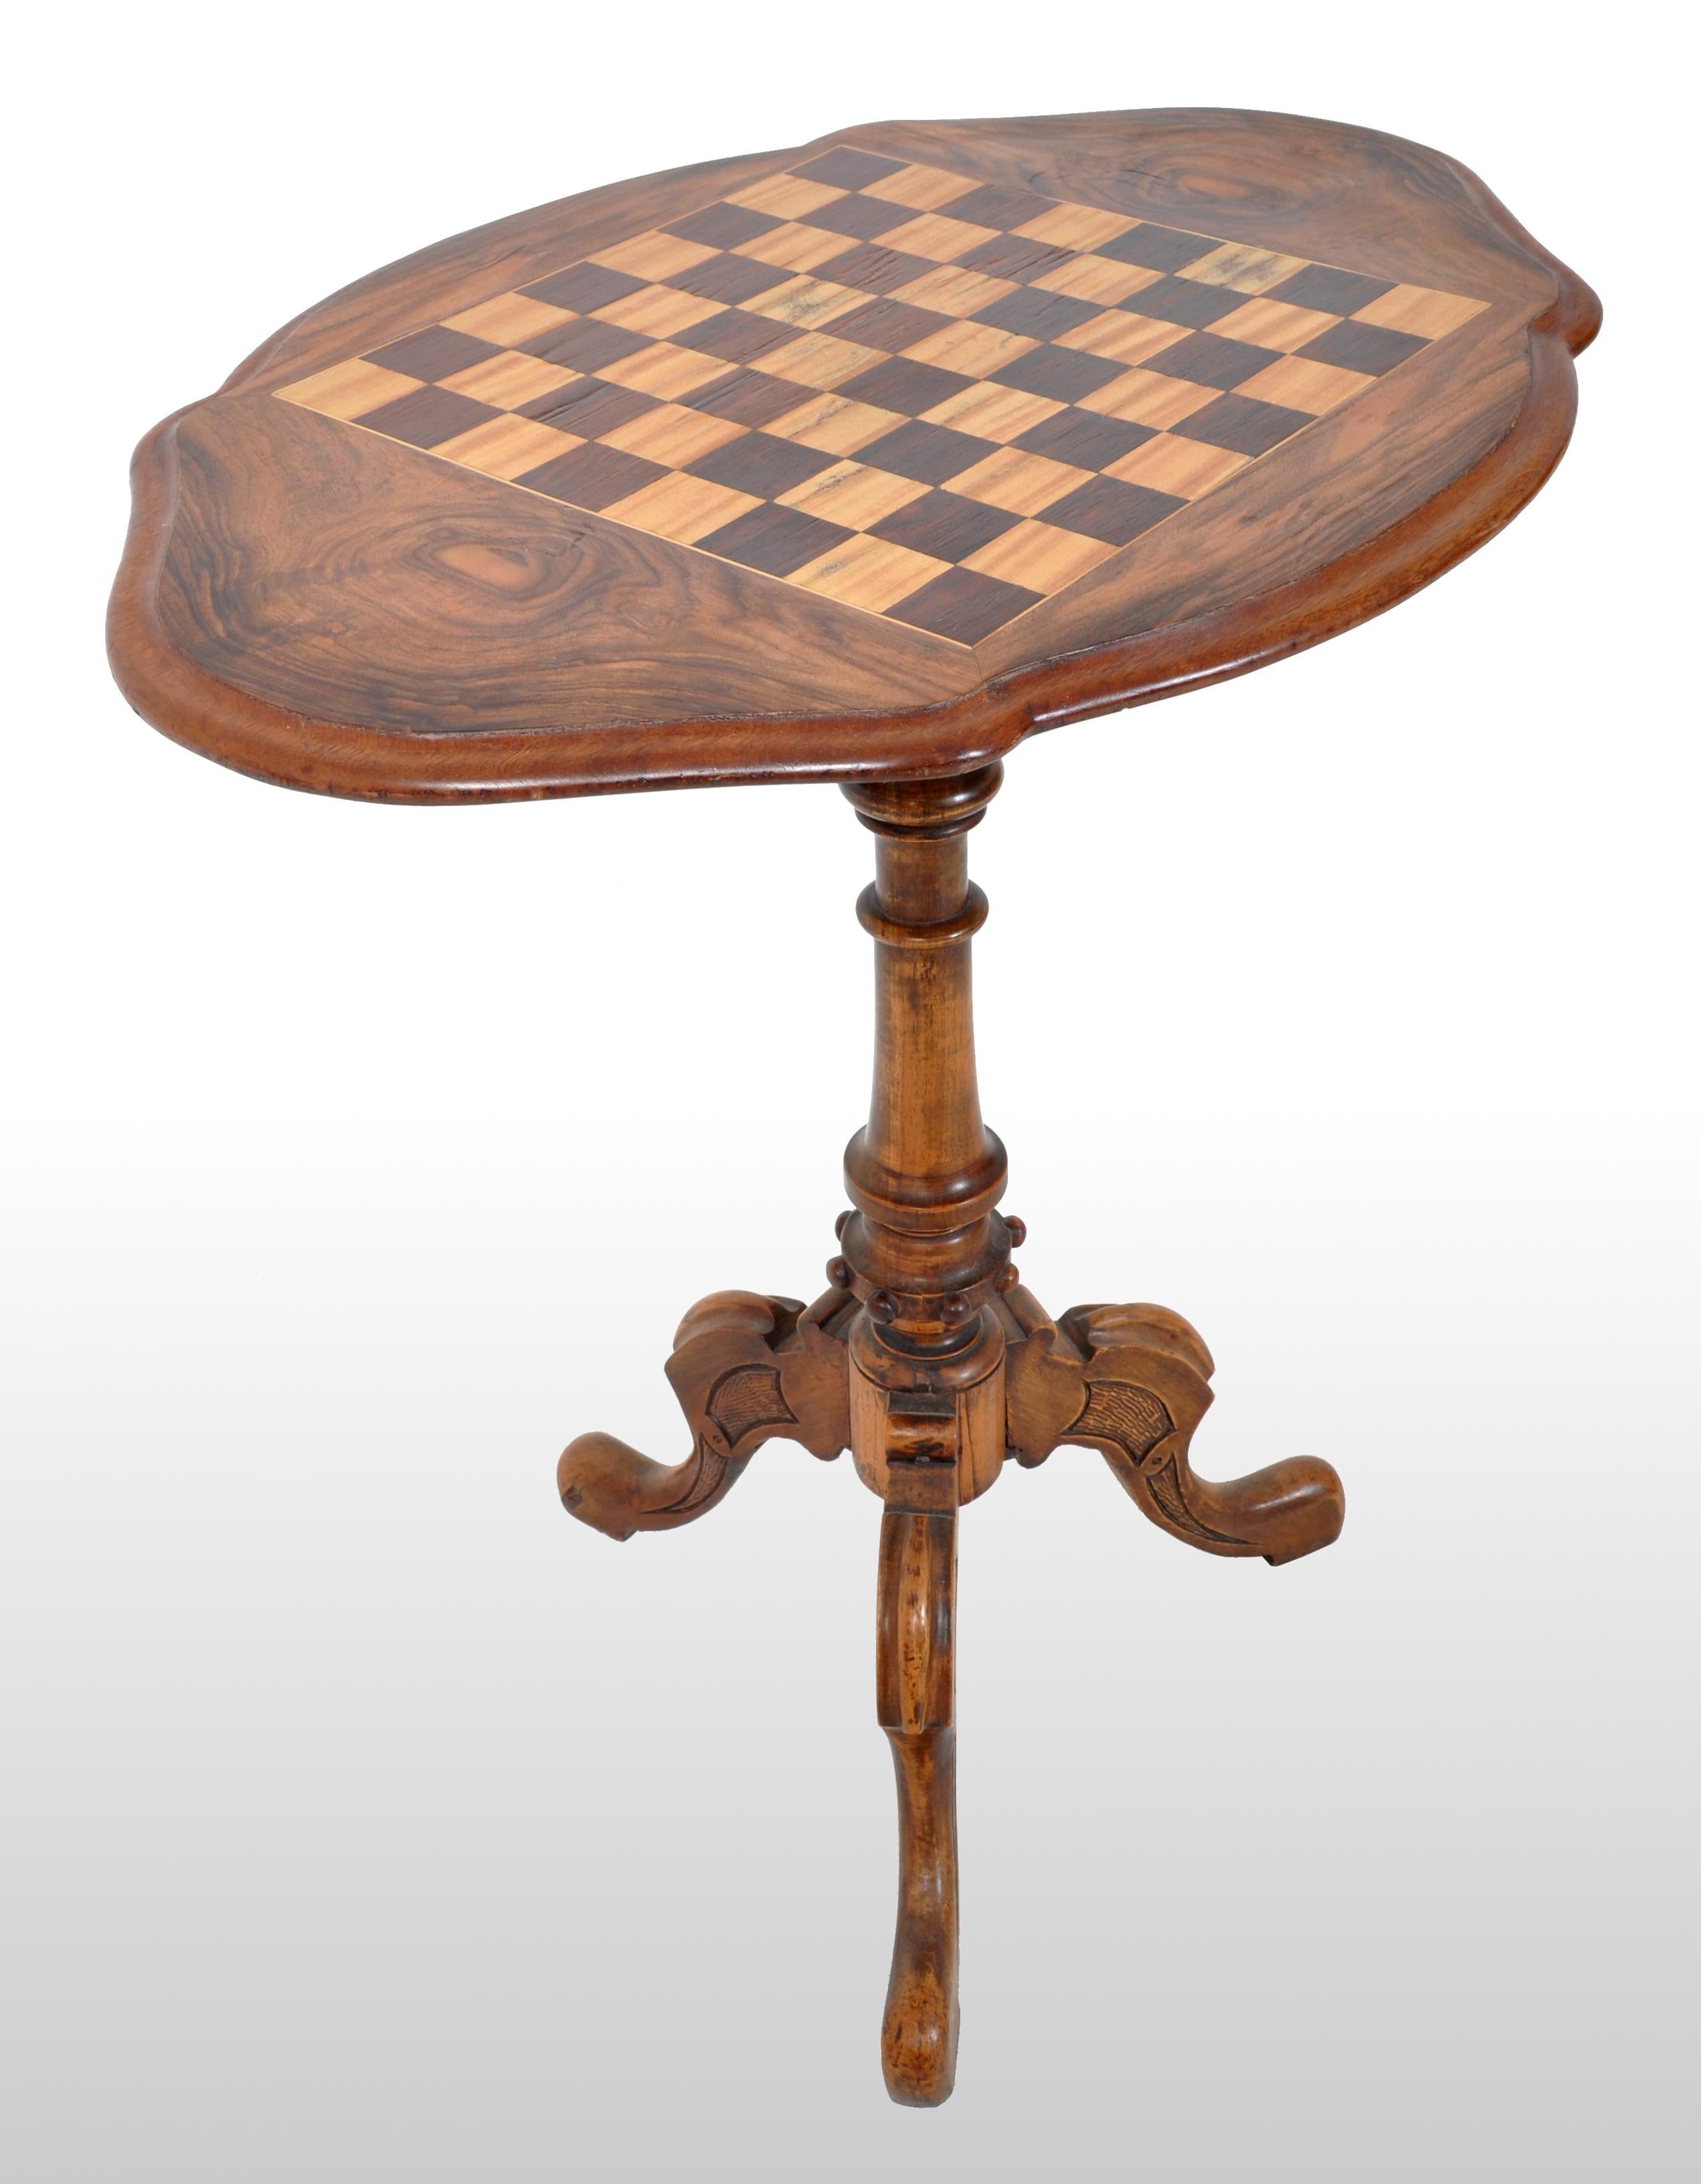 Antique American Victorian walnut tripod games / chess table, circa 1870. The table having a shaped top and inlaid with a chess/checker board, raised on a turned pedestal column and terminating to a carved tripod base.